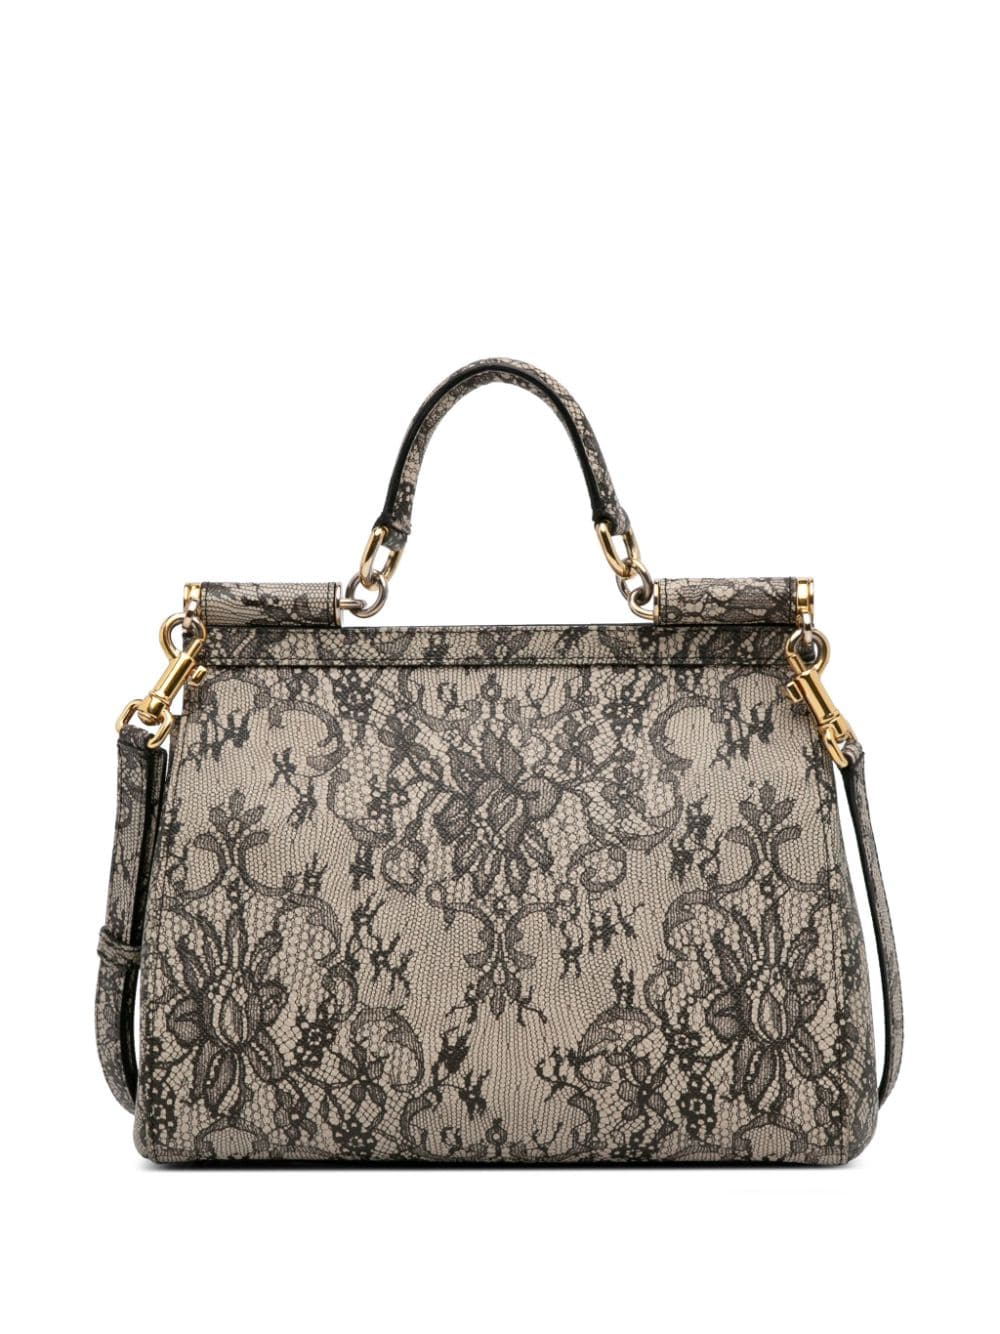 Pre-owned Dolce & Gabbana 21th Century Lace Printed Miss Sicily Satchel In Brown